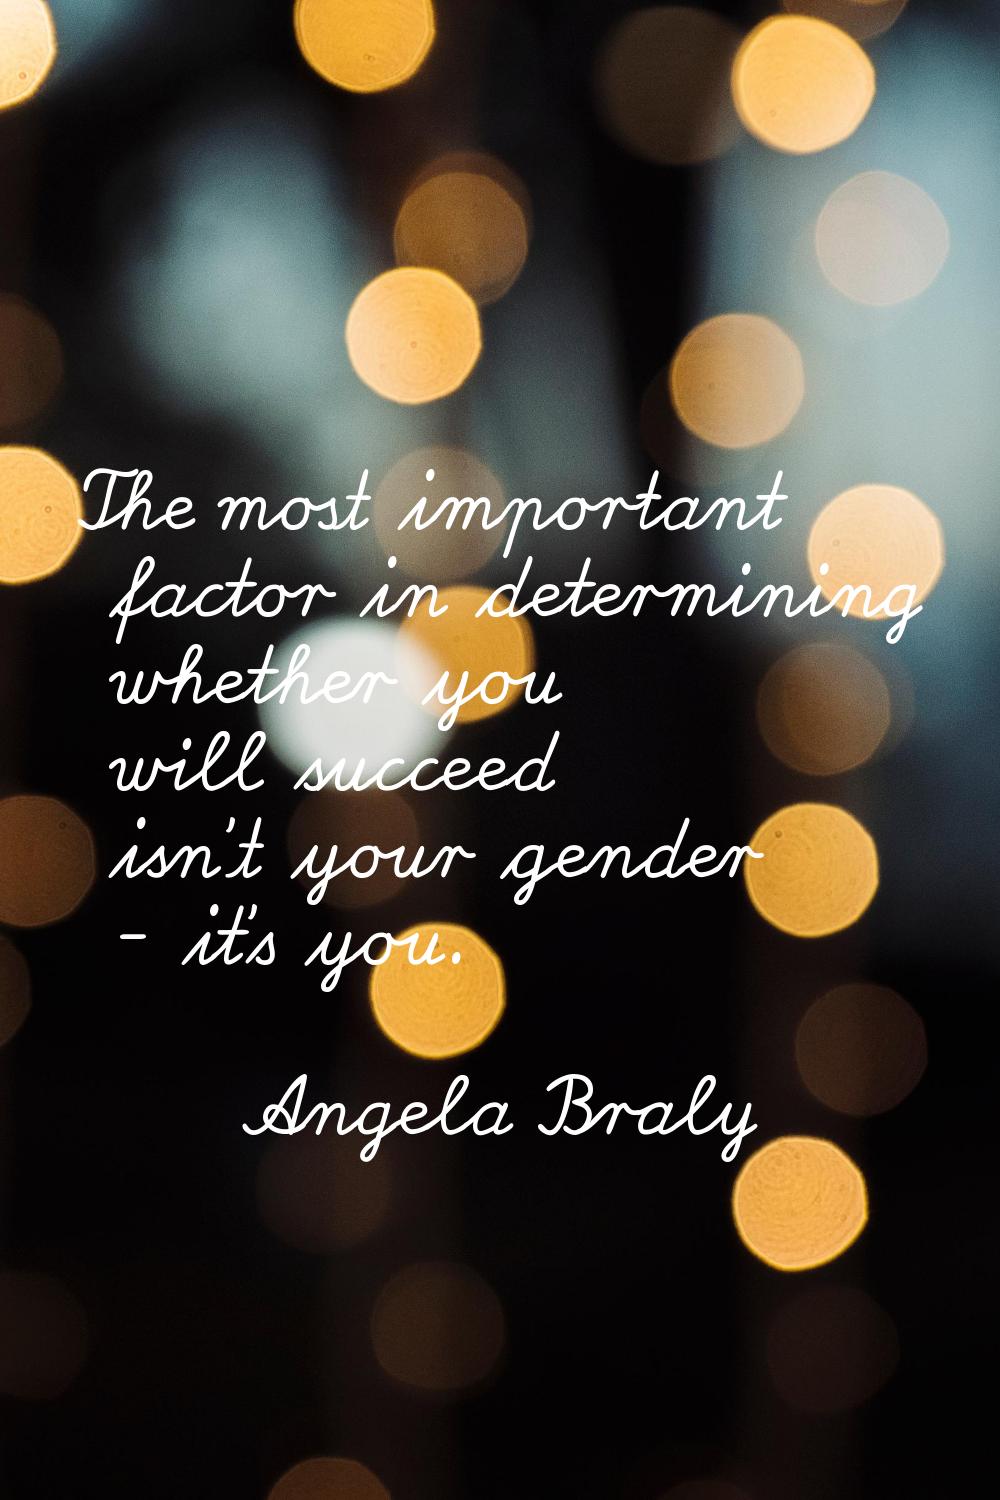 The most important factor in determining whether you will succeed isn't your gender - it's you.